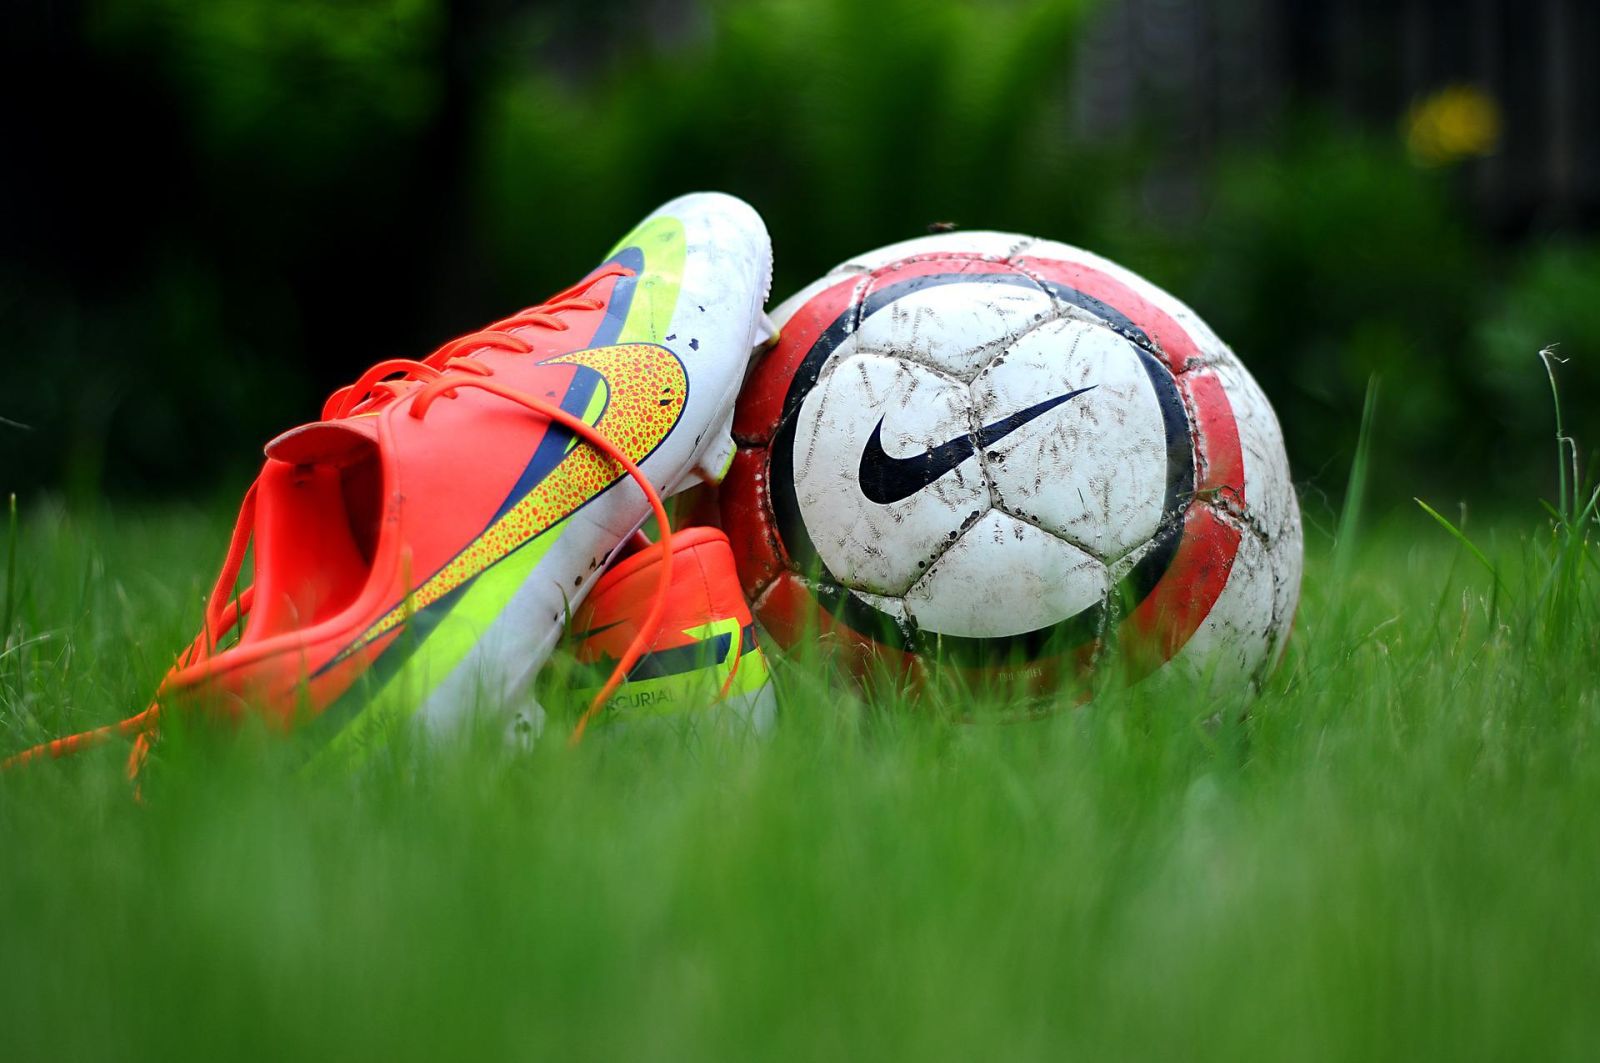 Consumer Products - Nike Cleats and Soccer Ball in Grass